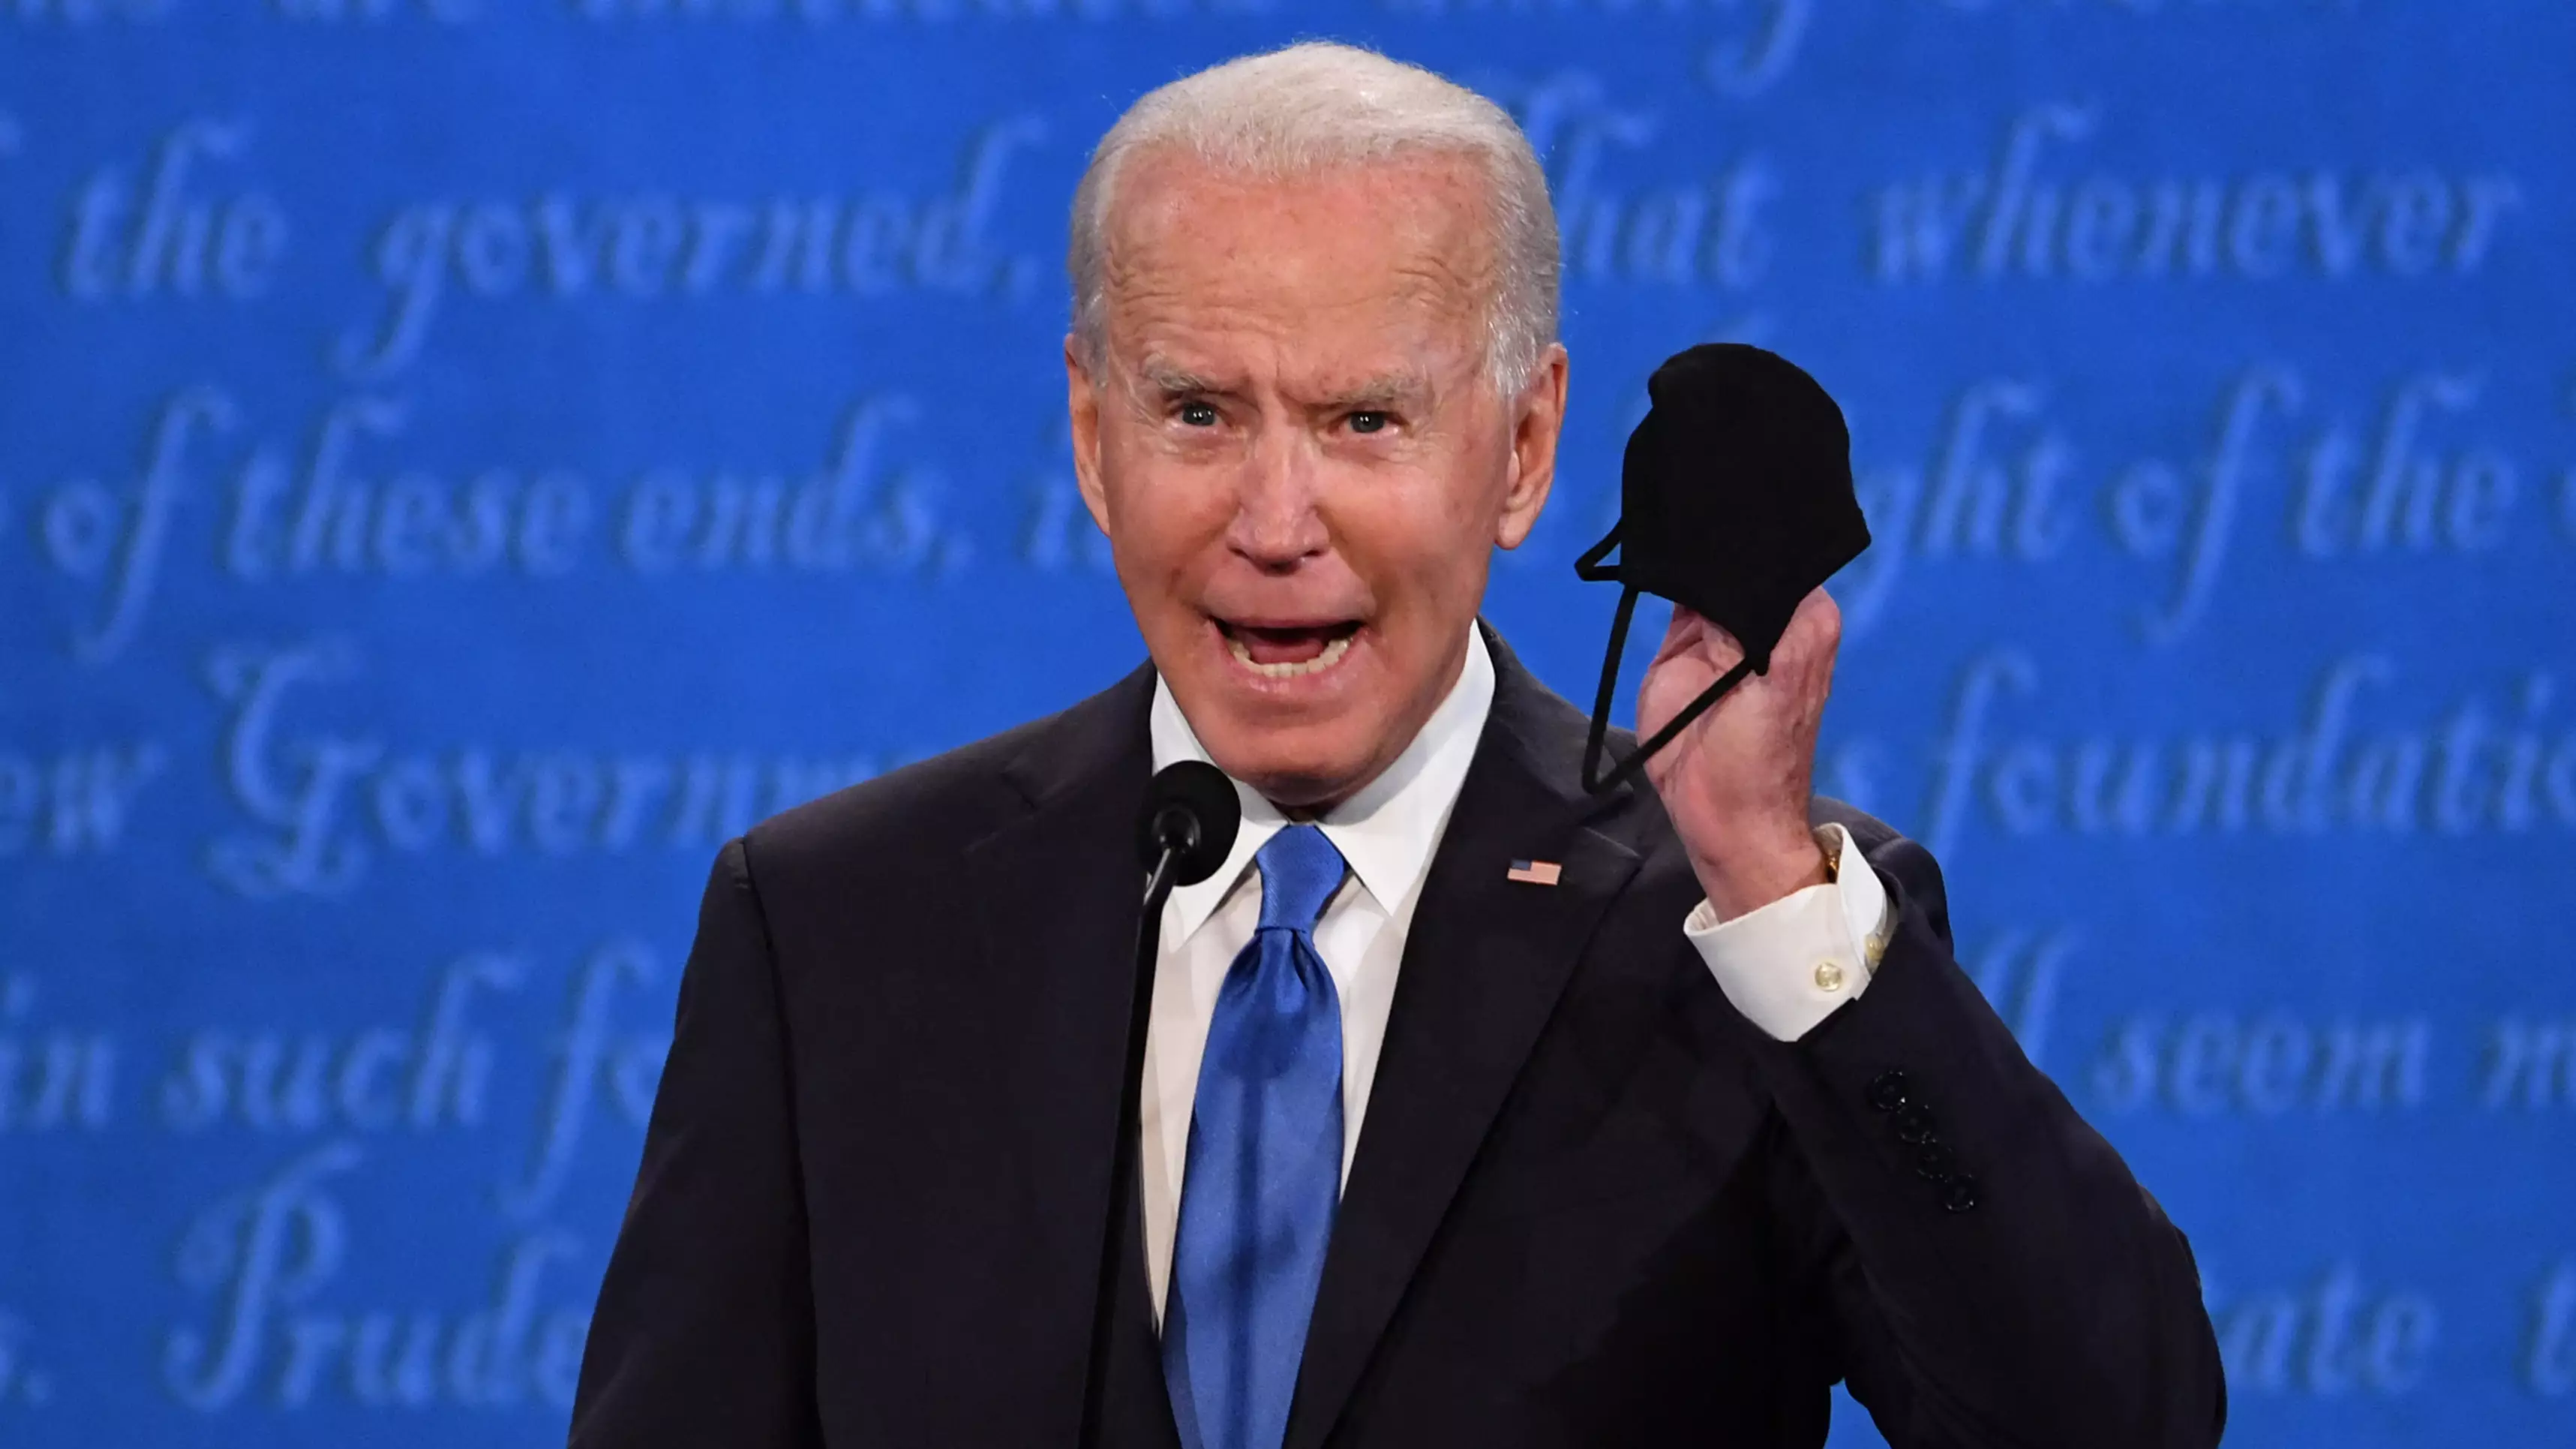 Joe Biden Becomes First Candidate In US Election History To Get More Than 80 Million Votes